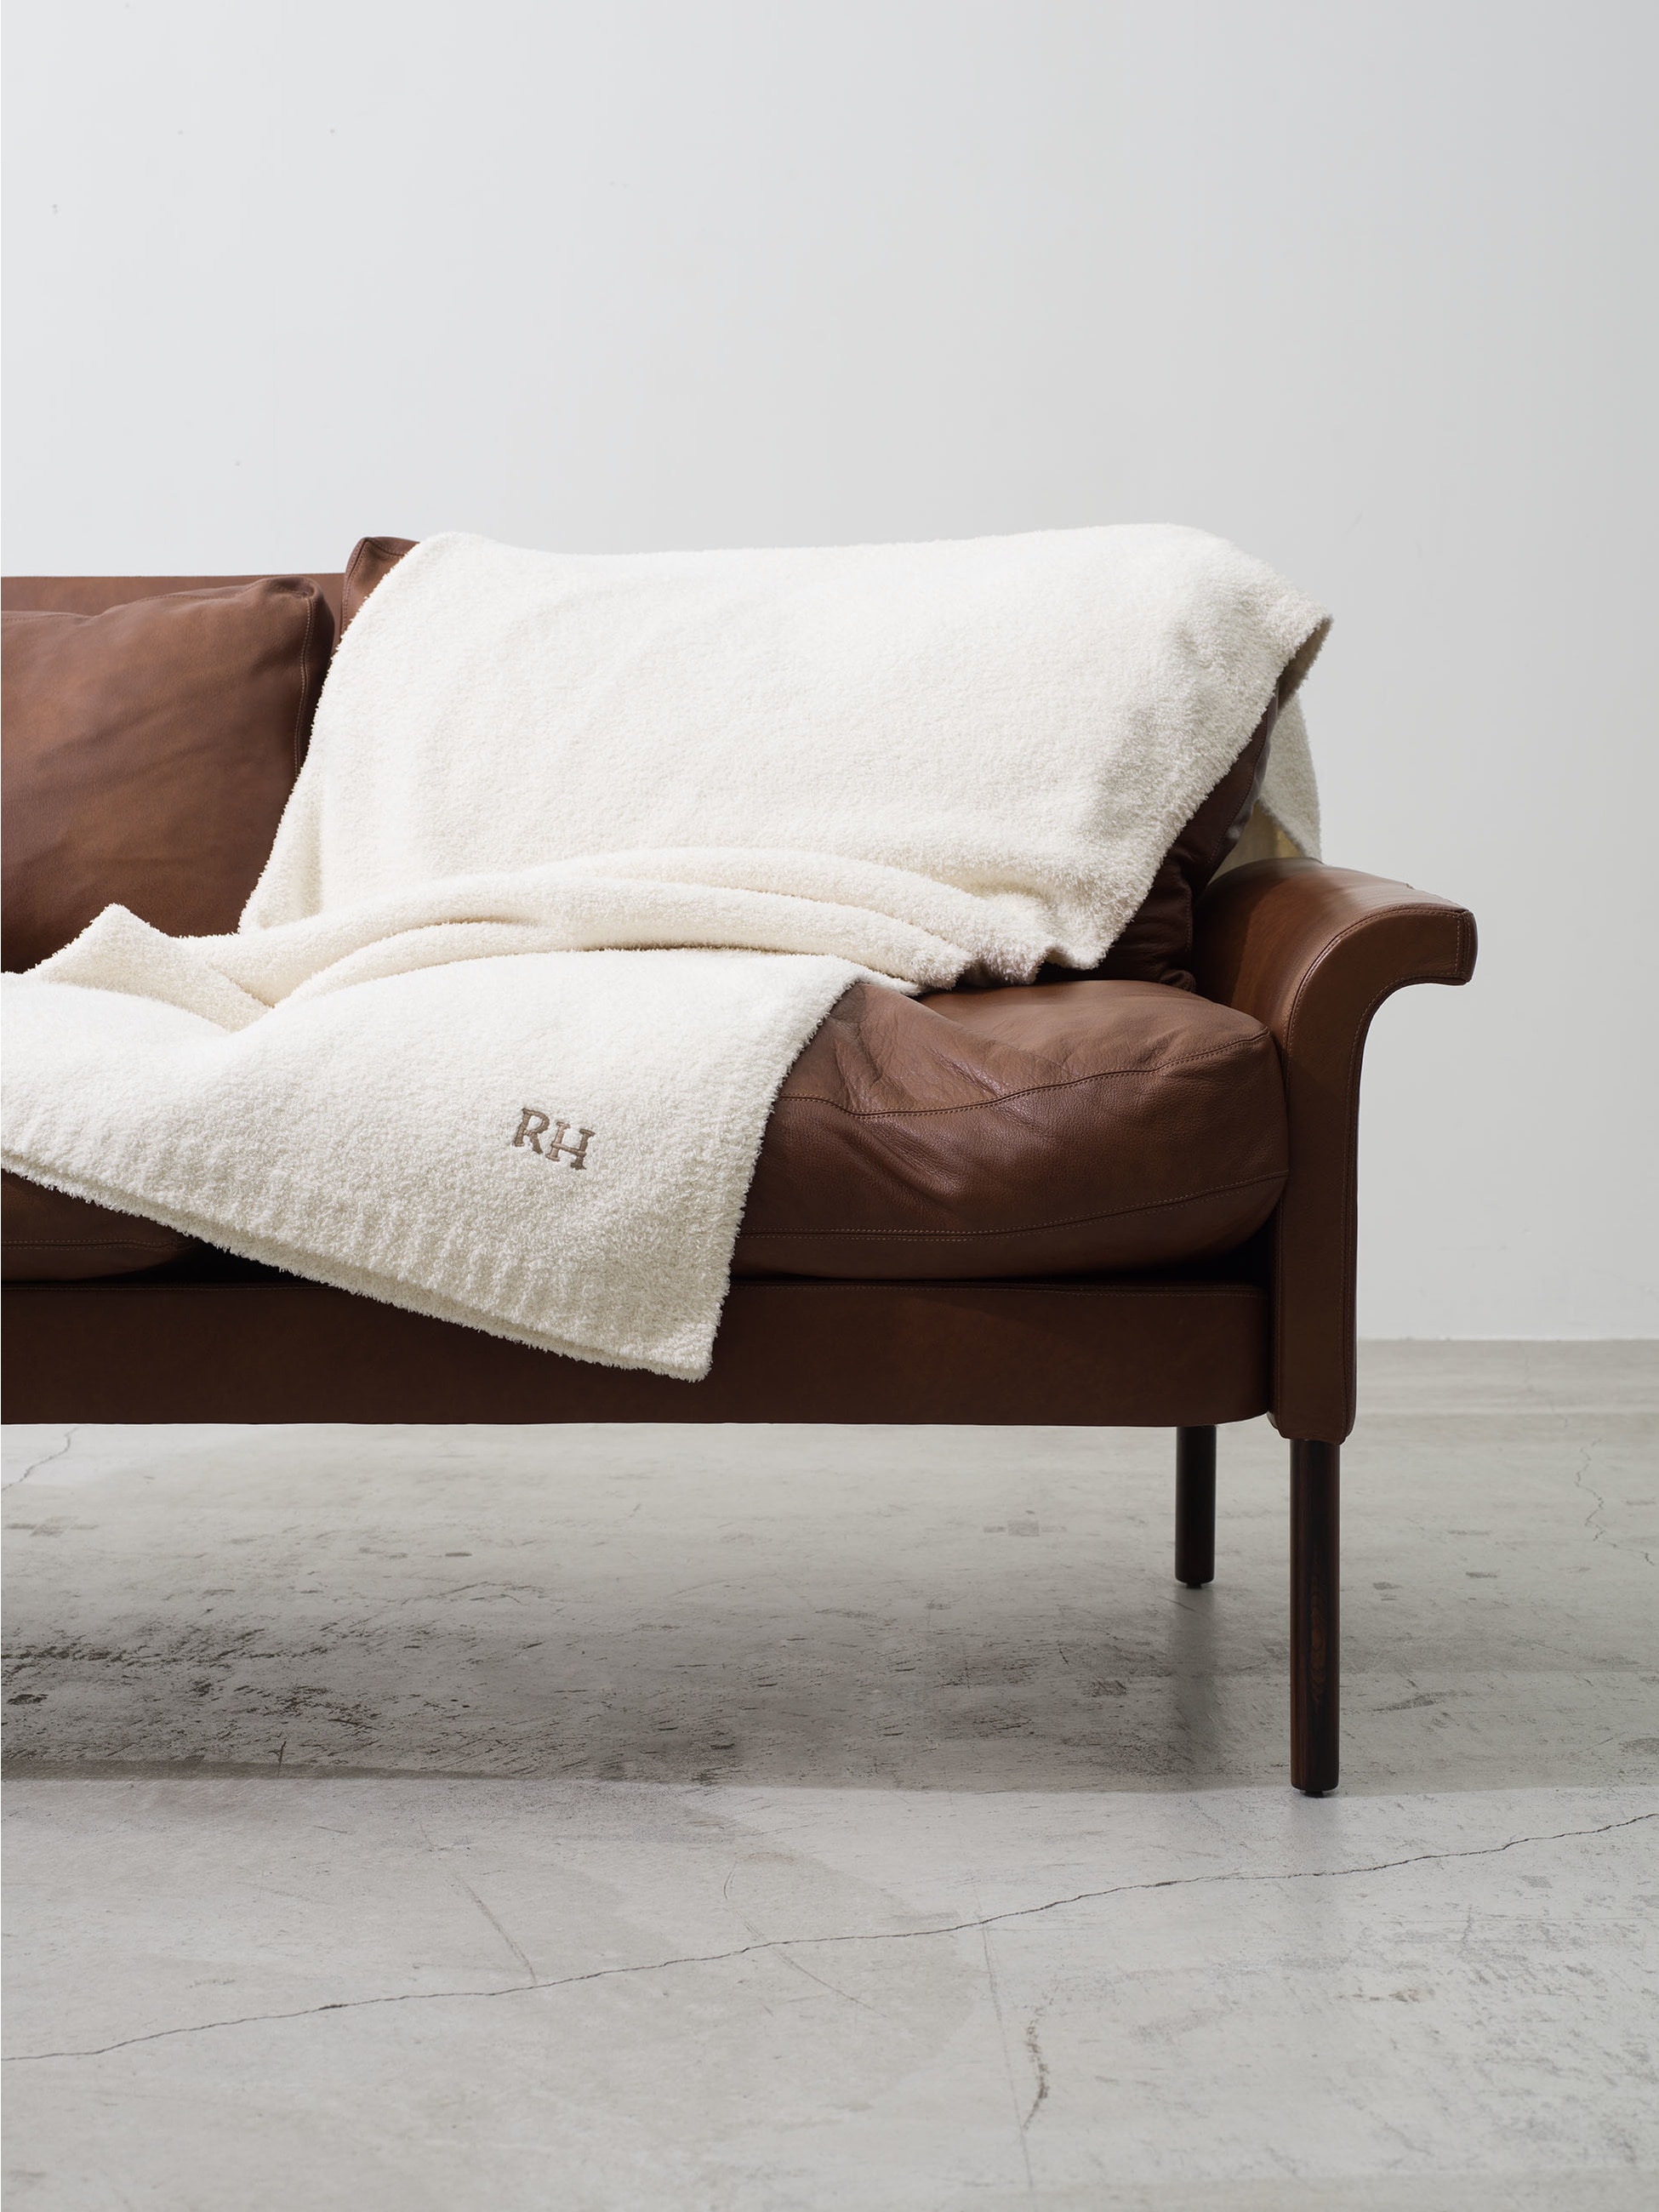 Eco Cozy Chic Basic Sofa Blanket｜BAREFOOT DREAMS for Ron Herman